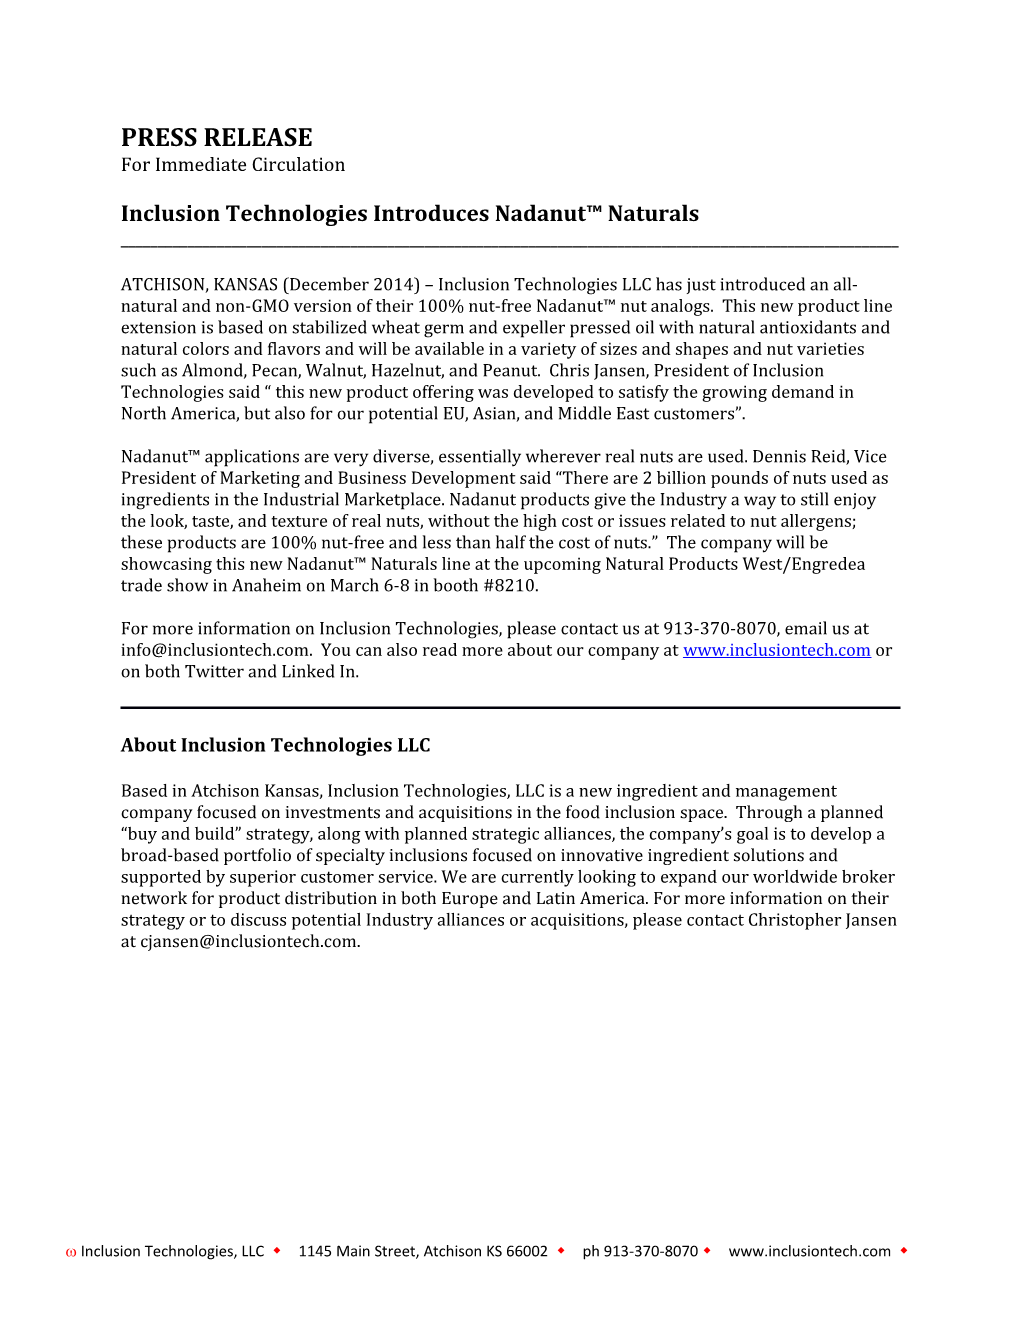 Inclusion Technologies Introduces Nadanut Naturals